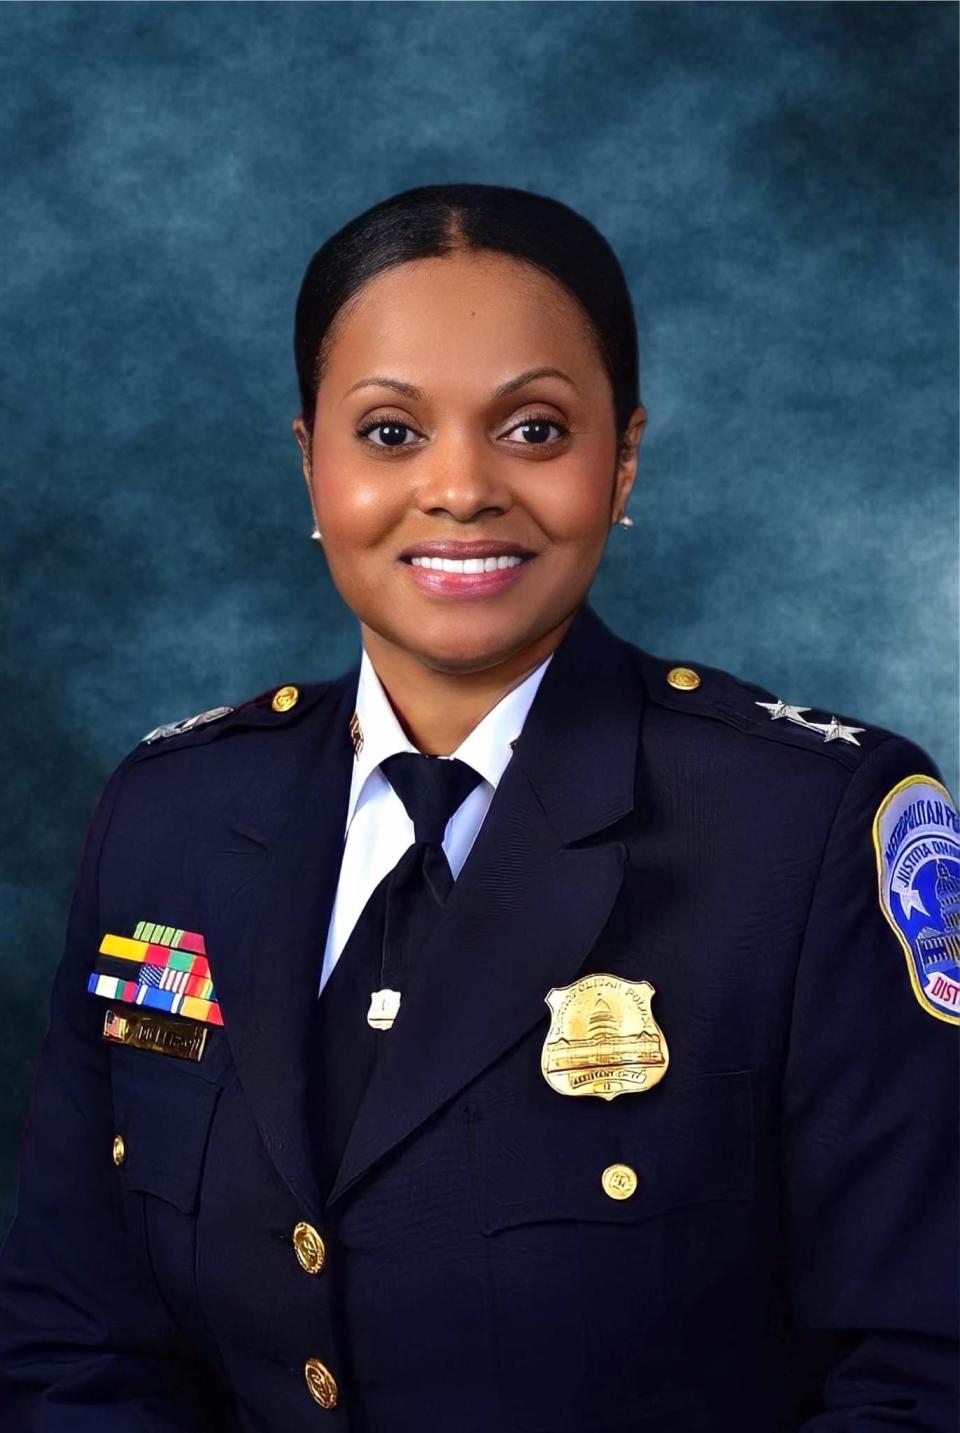 Chanel Dickerson, retired Assistant Chief of Police for the Metropolitan Police Department in Washington D.C.